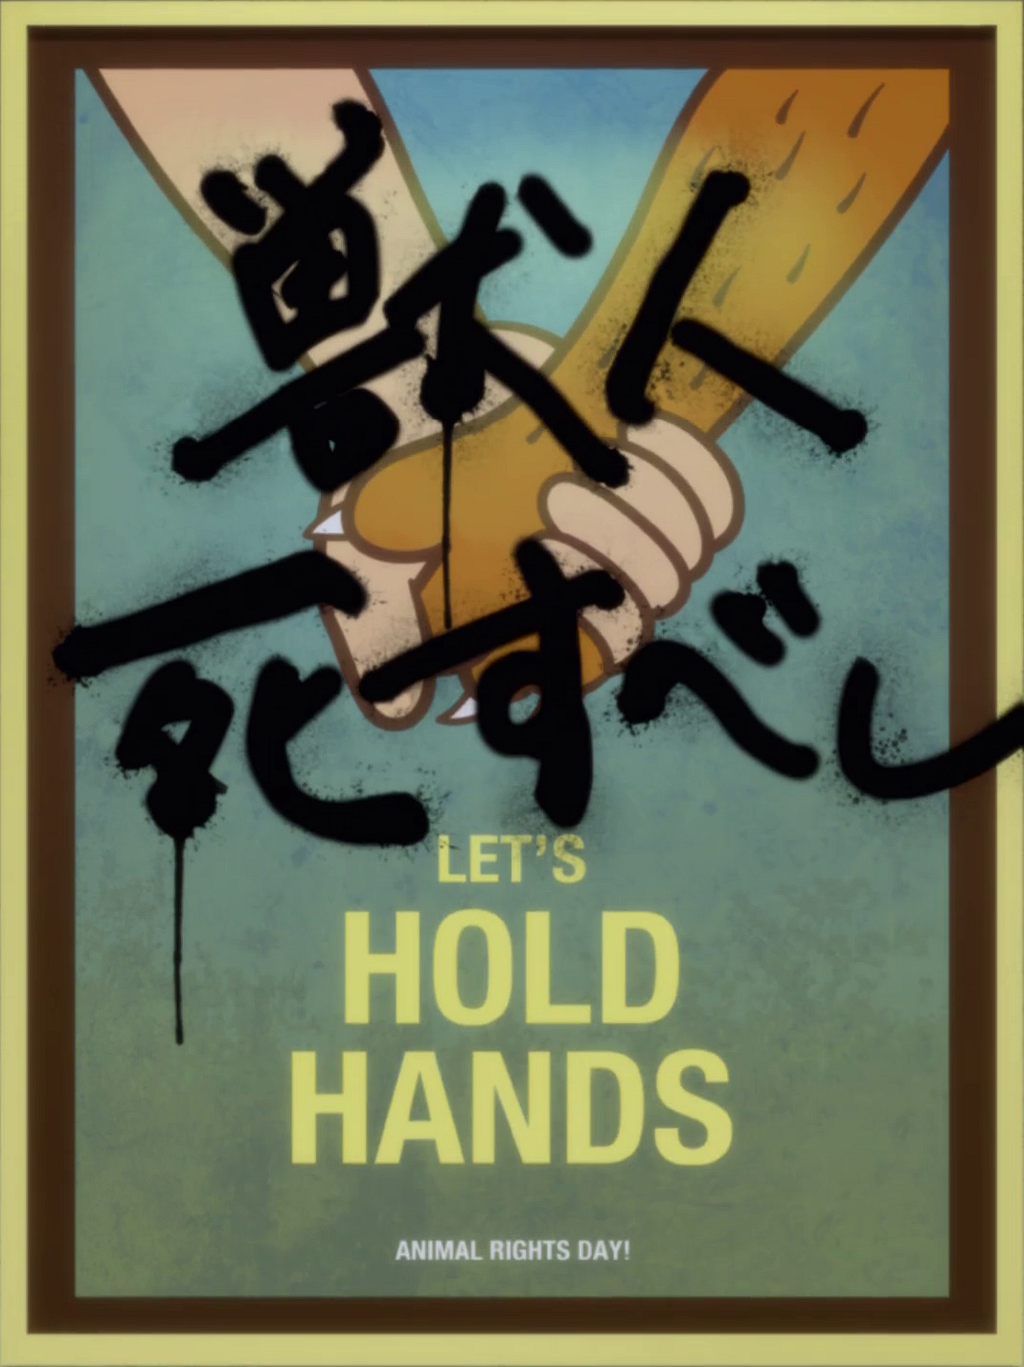 Poster of a human and beastman holding hands, text “let’s hold hands. Animal rights day.” Graffiti says “beastmen must die.”